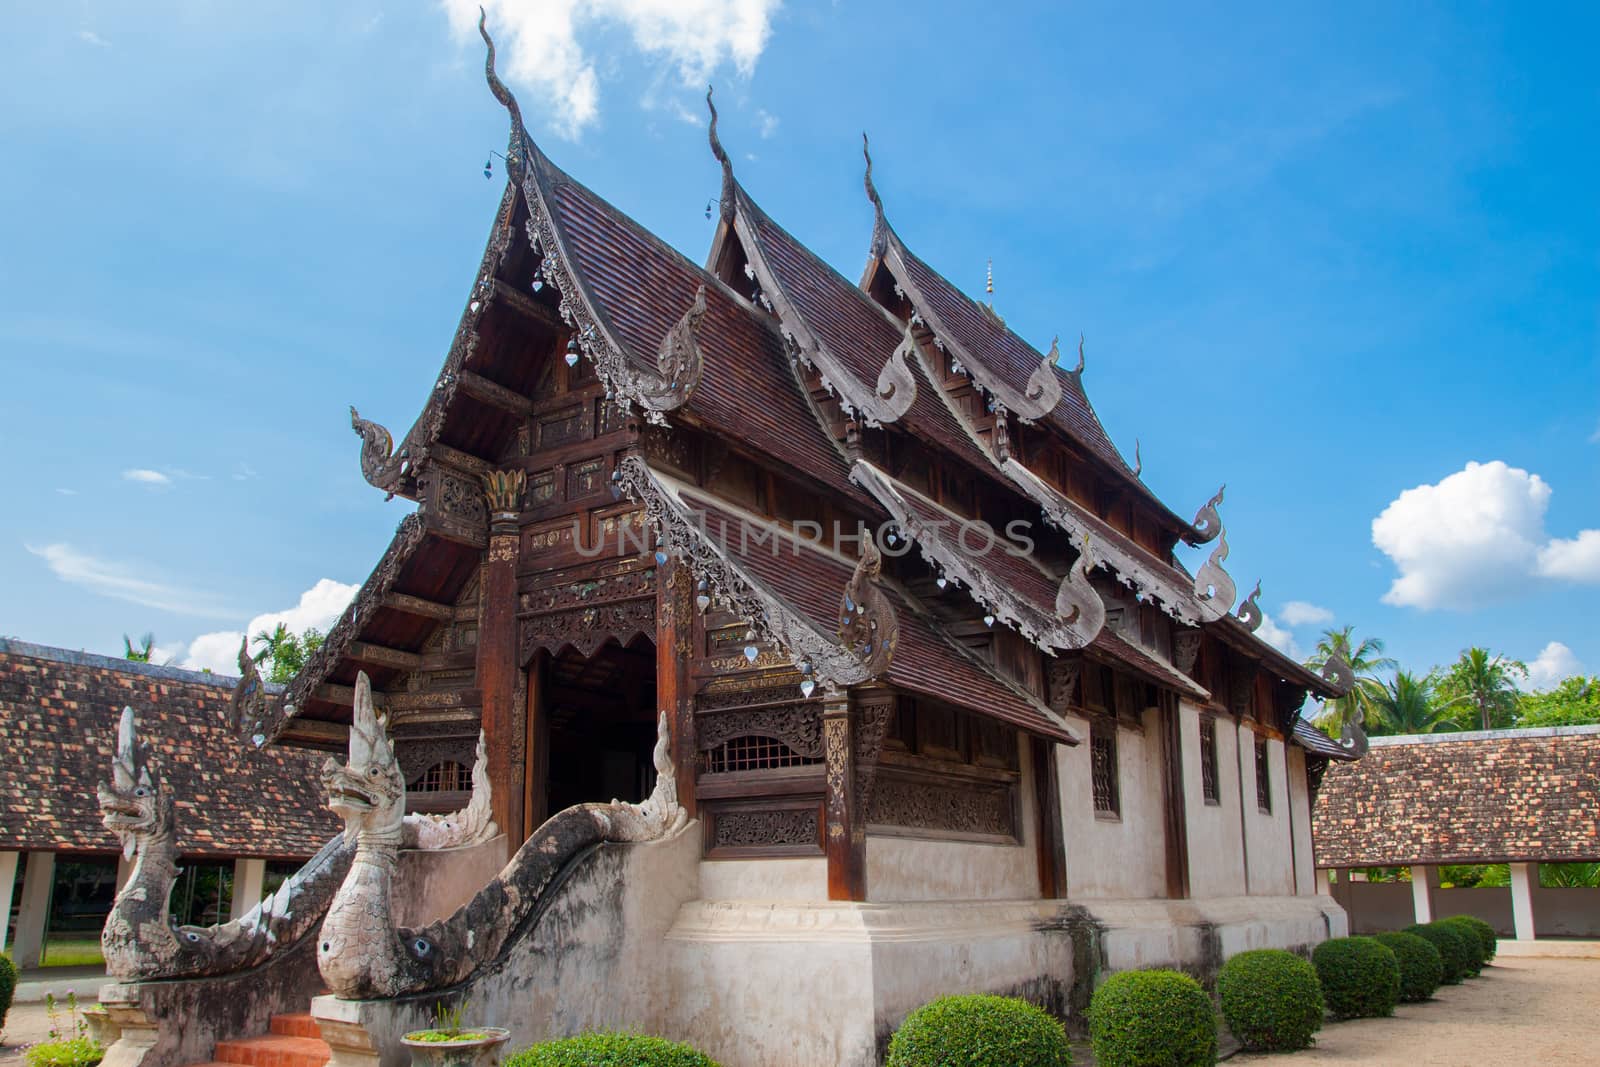 Wat Ton Kain 700 years or Inthrawat temple , popular famous tourist attraction landmark in Chiangmai. Old wooden Thai temple in Chiang Mai Thailand